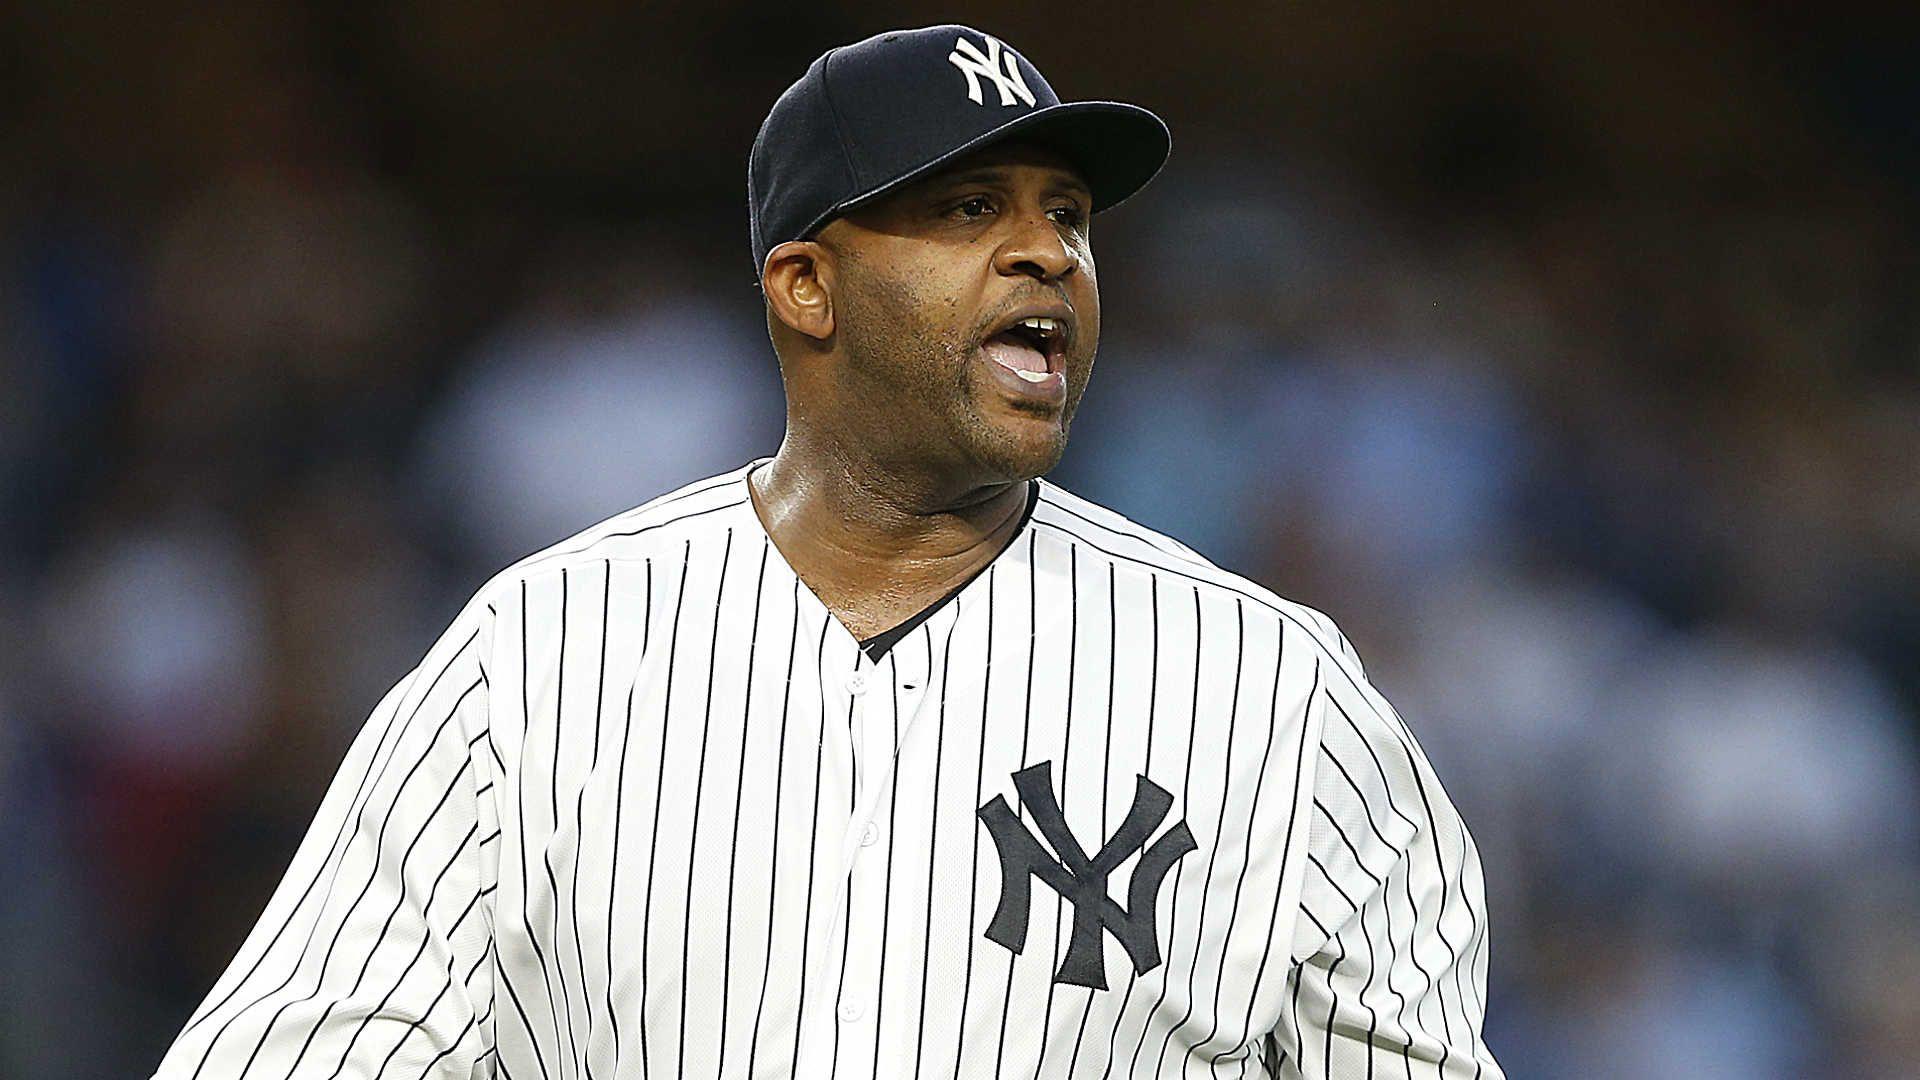 Sabathia mad about the Red Sox bunting on him; it's called playing